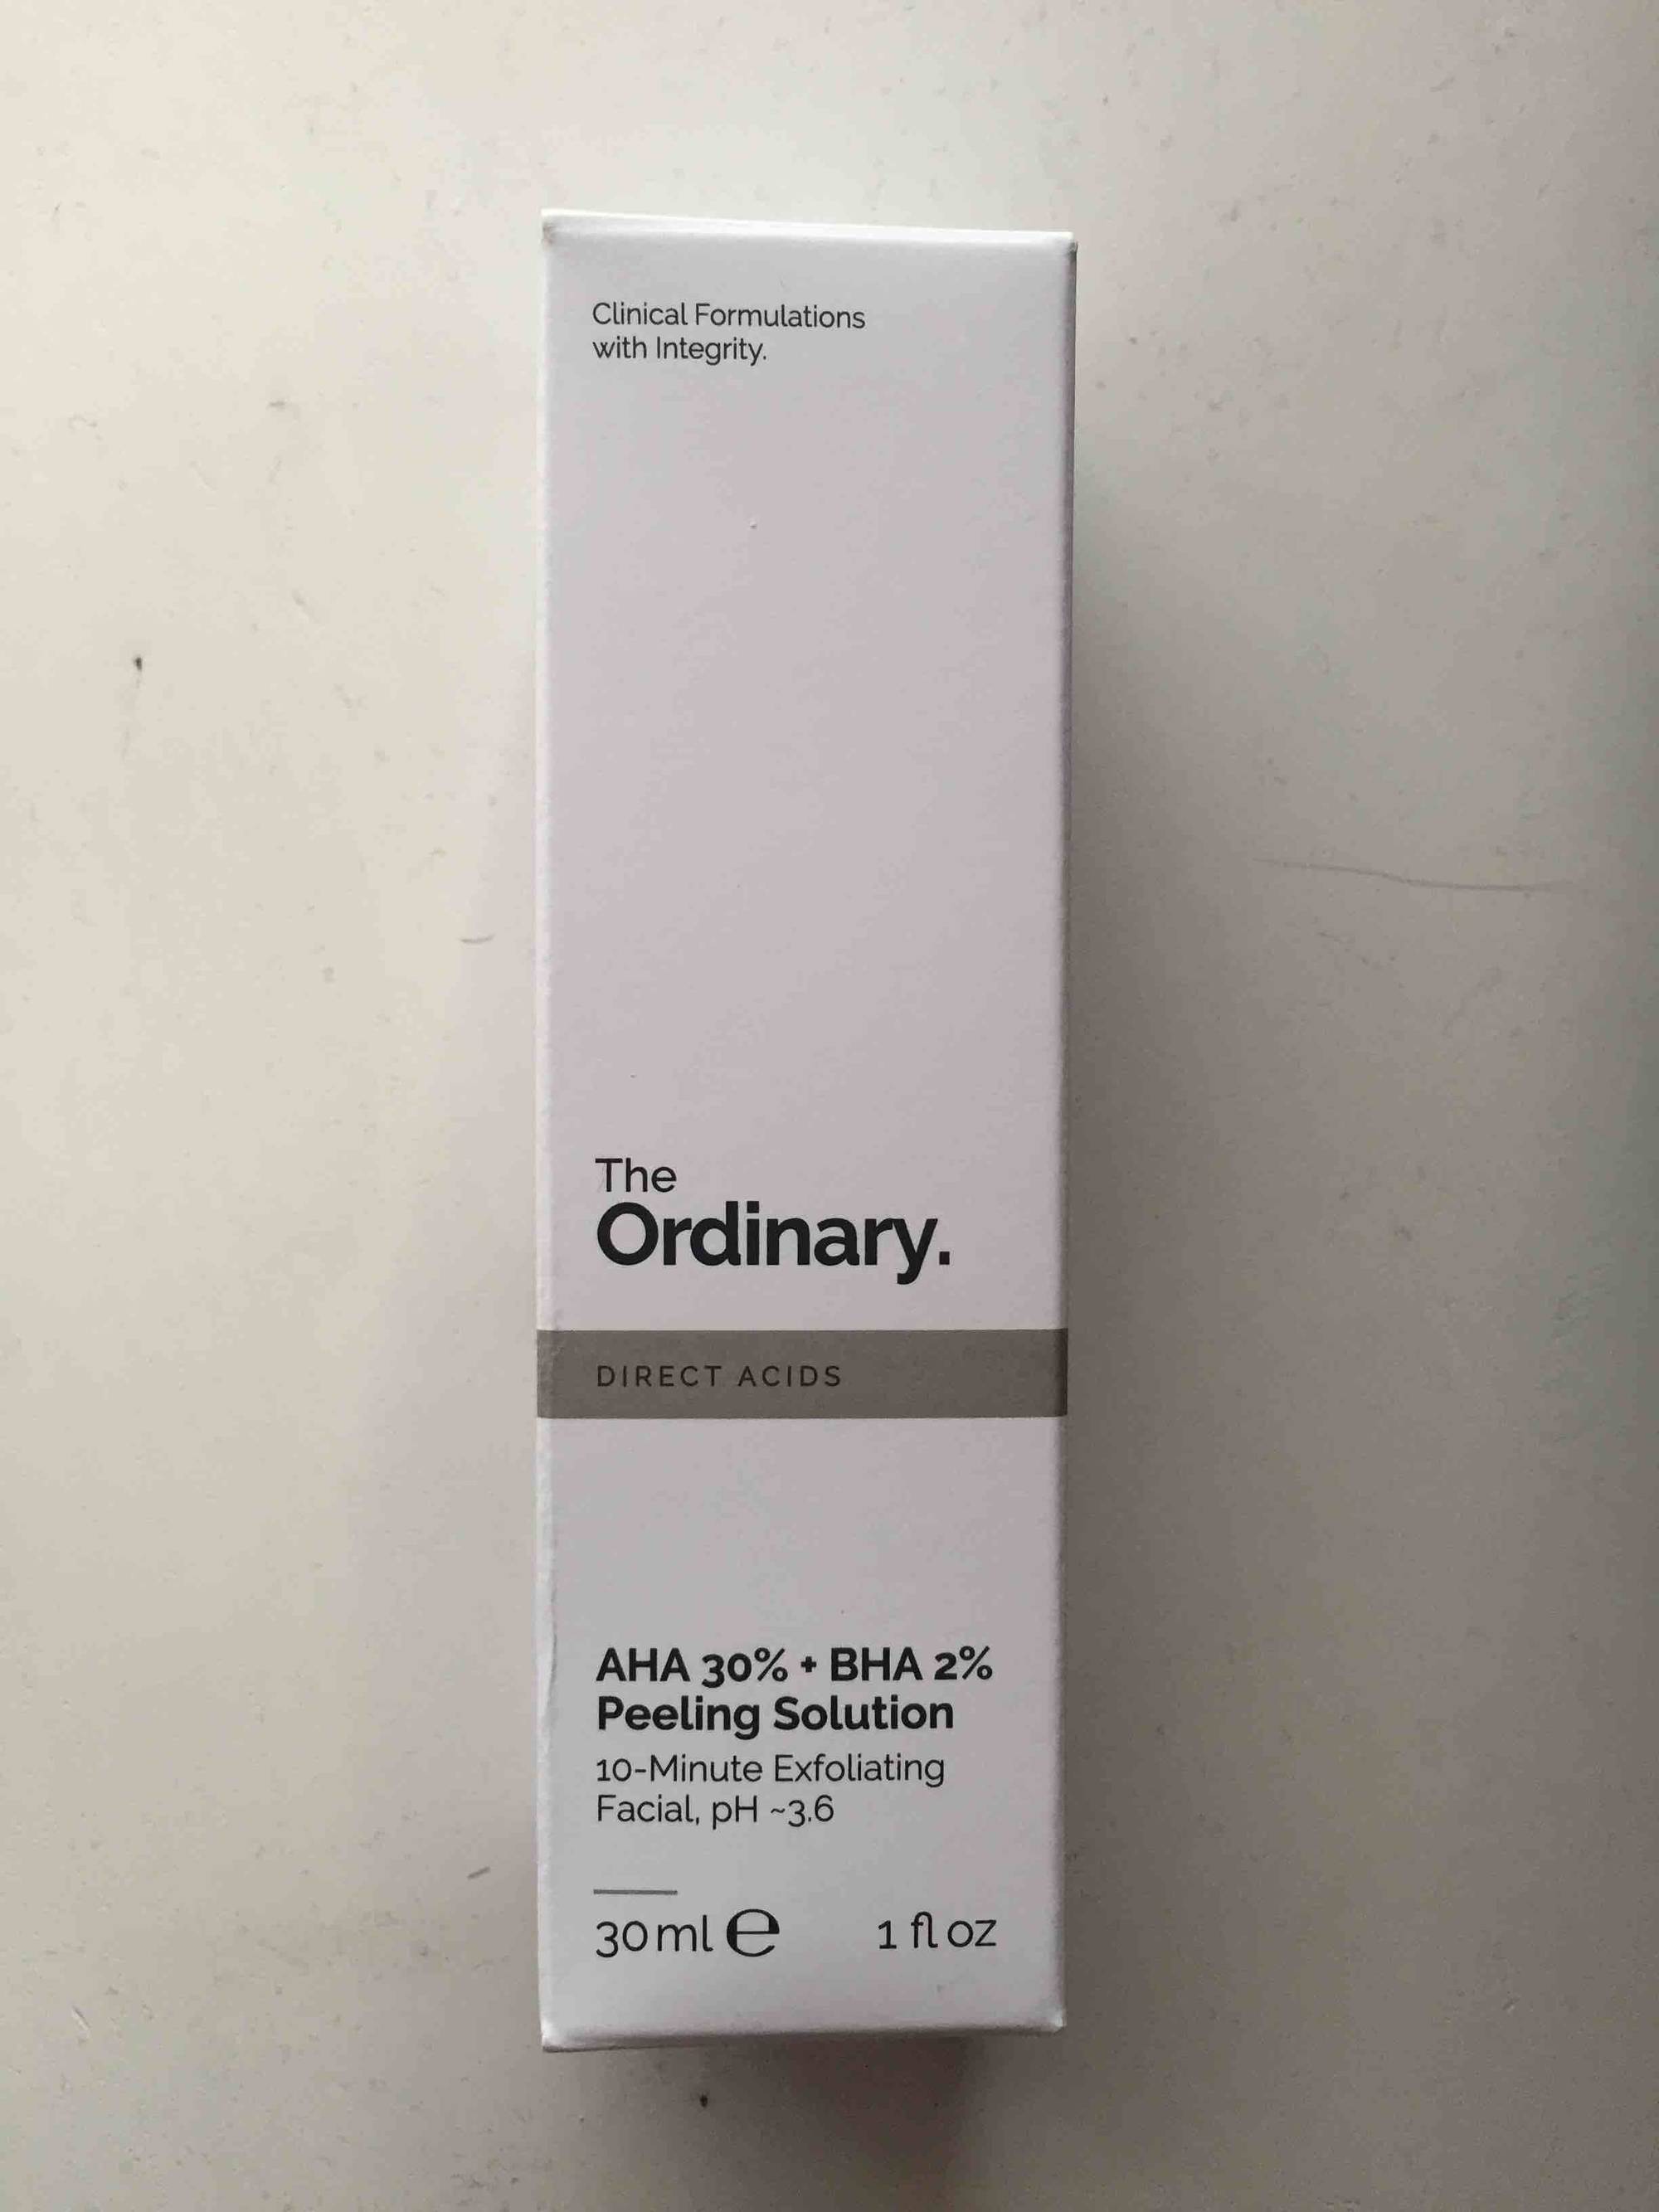 THE ORDINARY - Peeling solution - 10-minute exfoliating facial